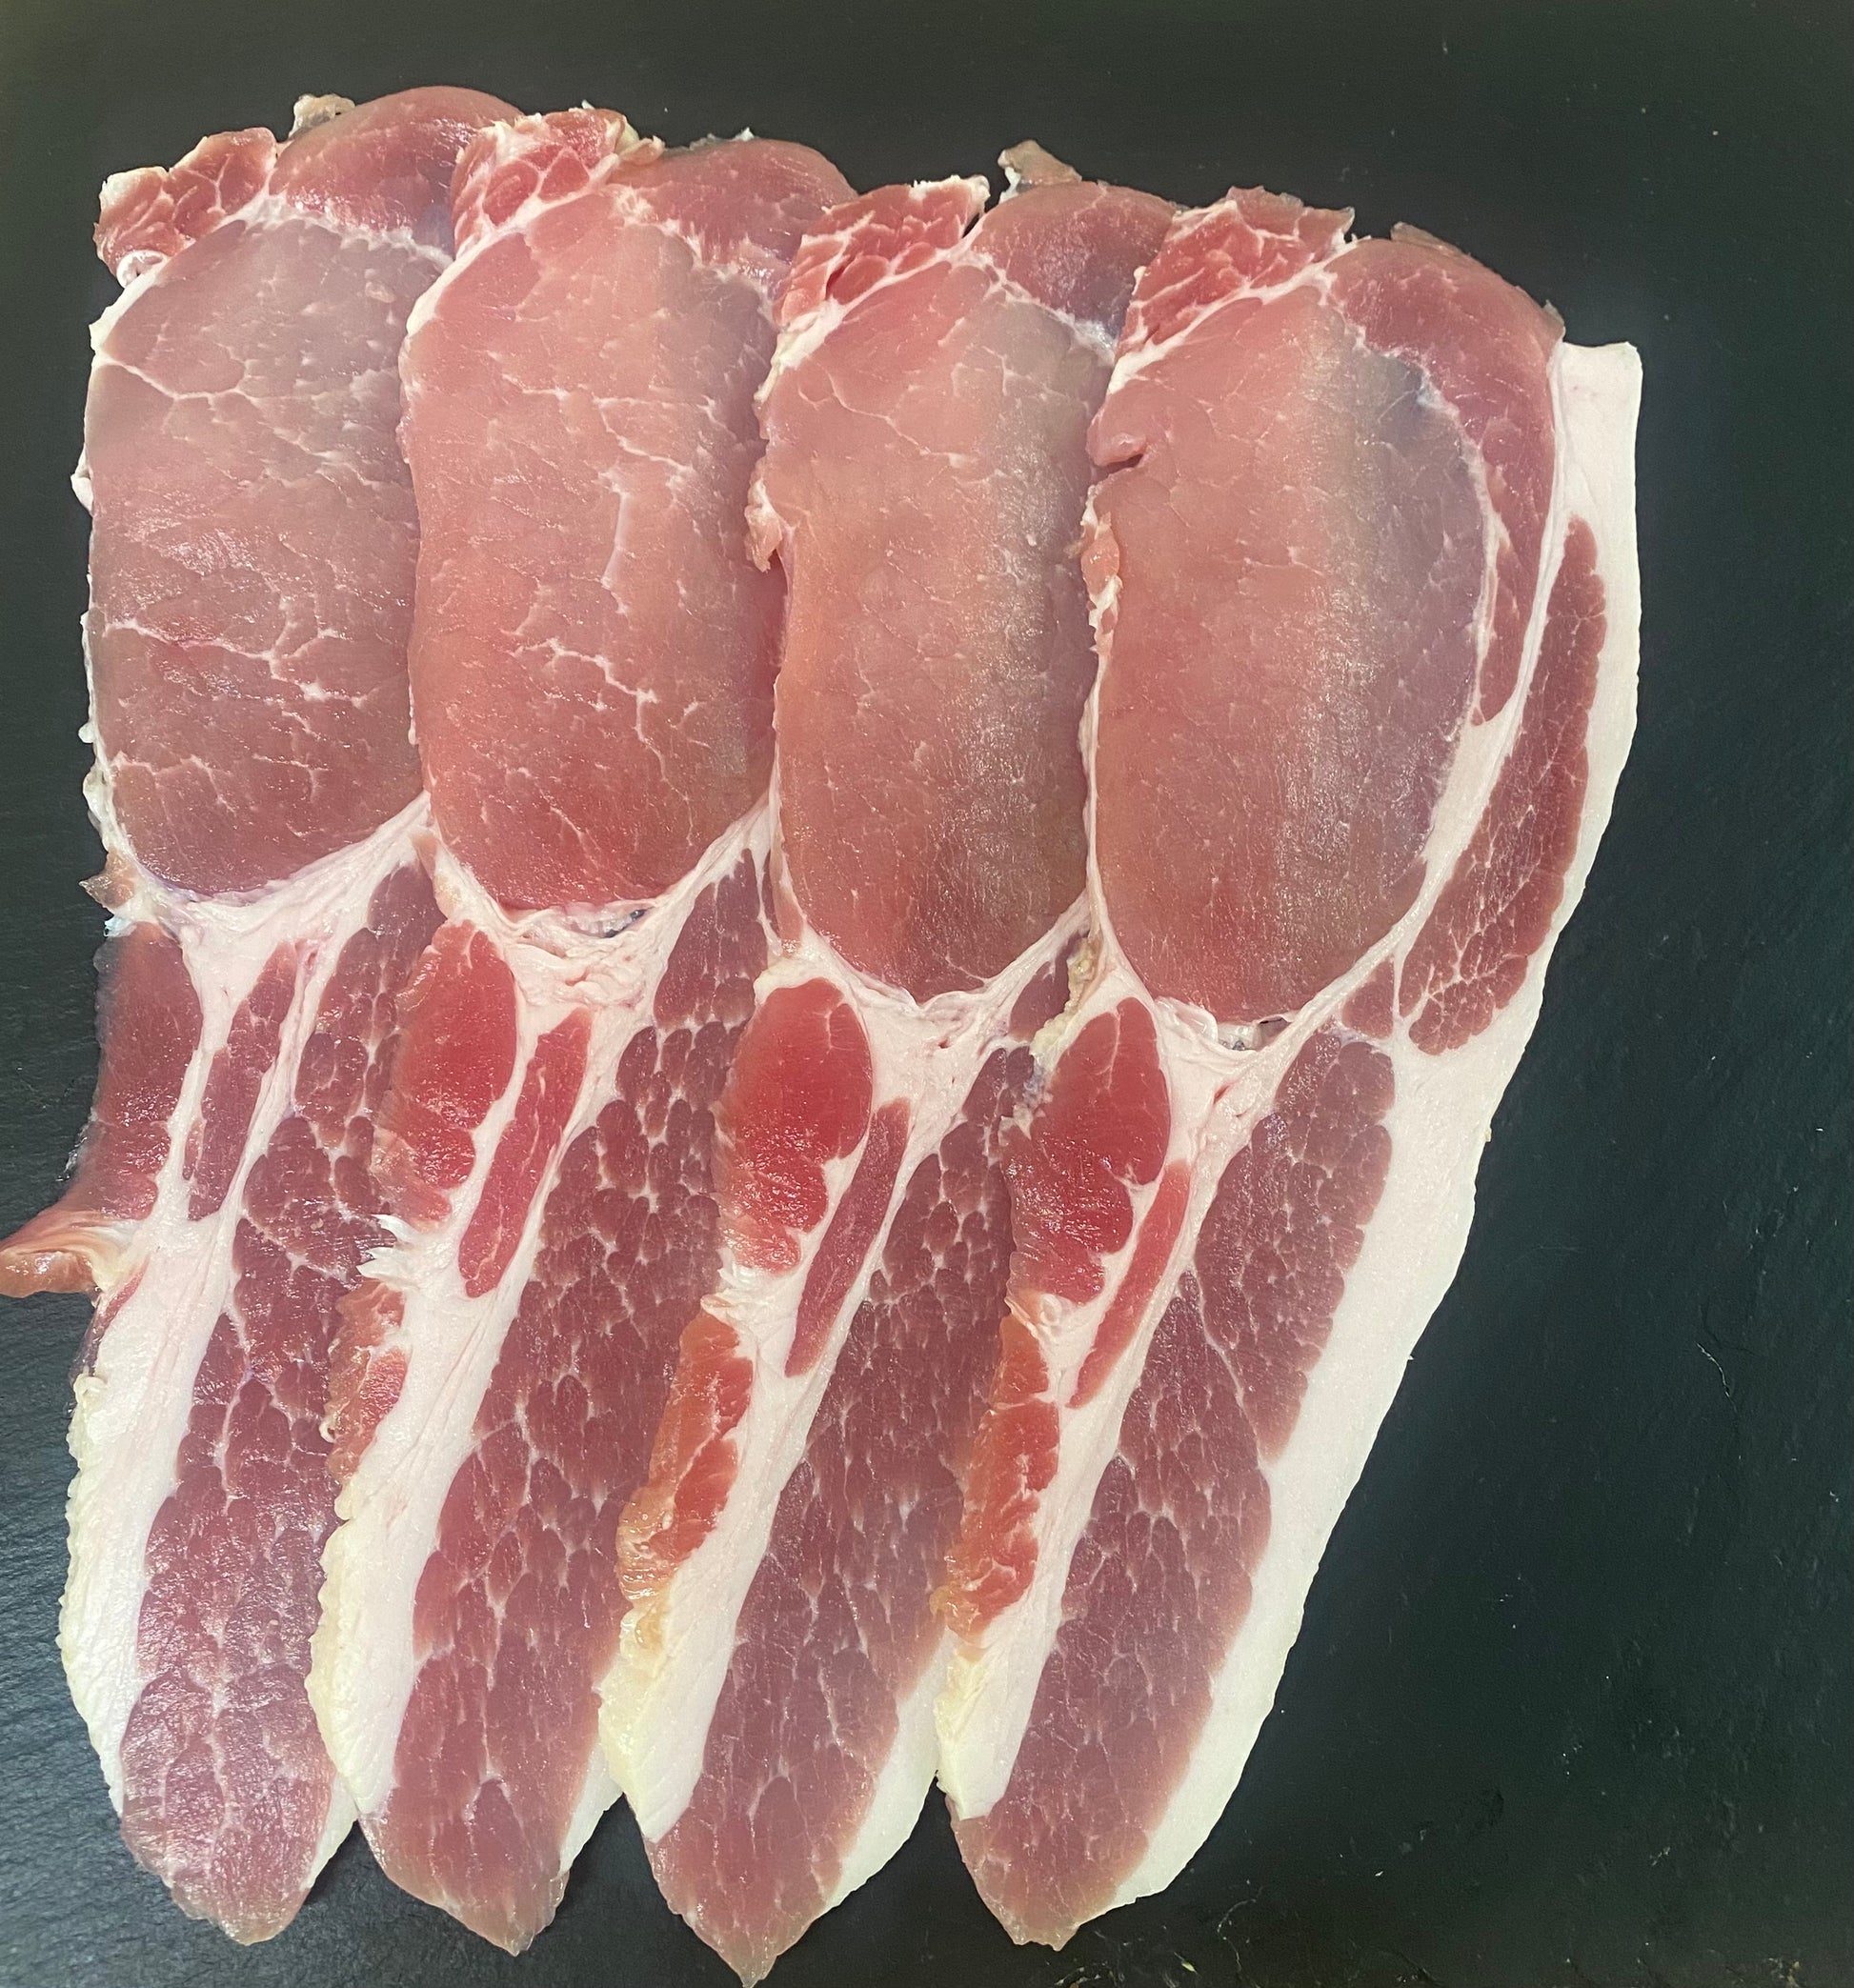 Dry Cured Back Bacon